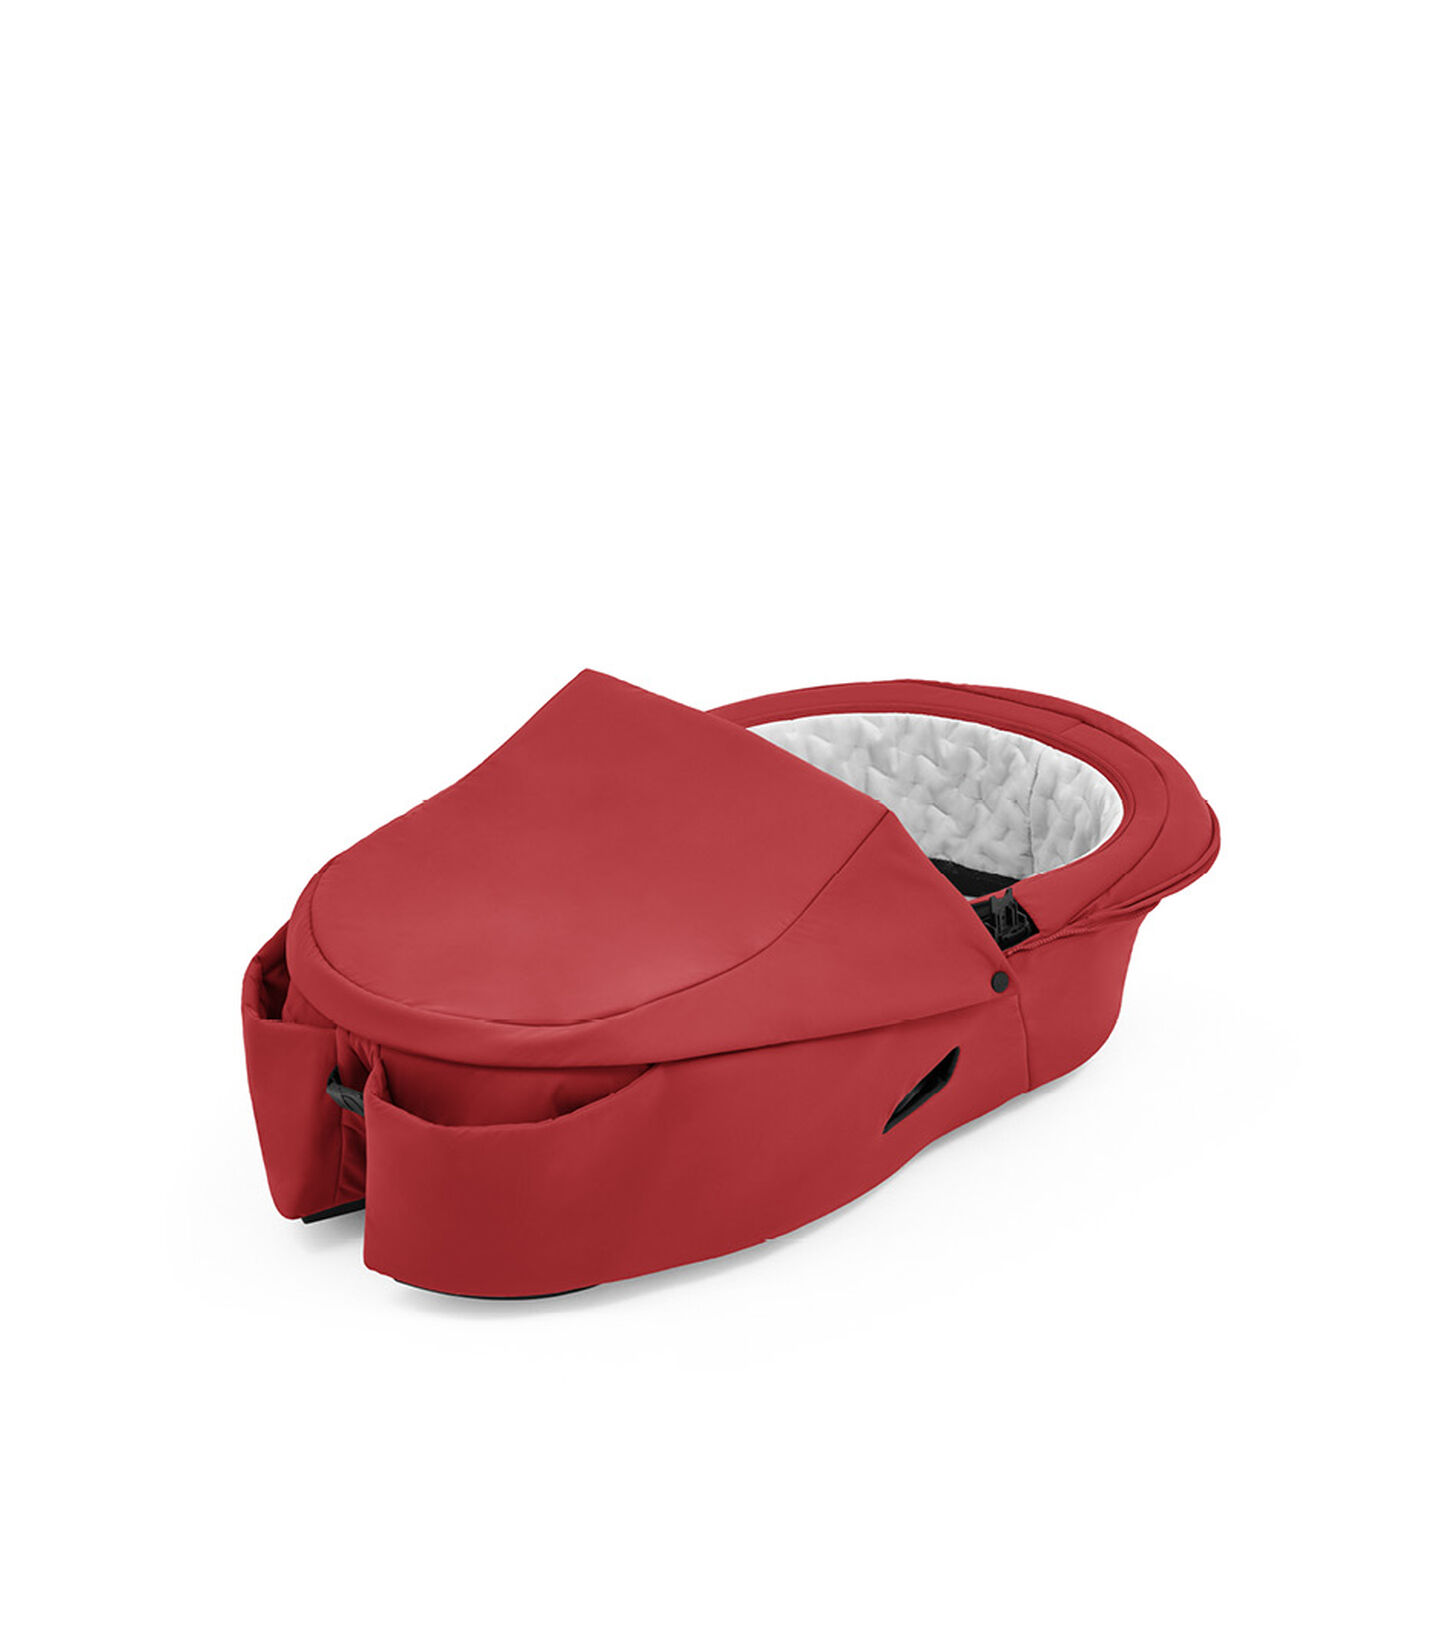 Stokke® Xplory® X liggedel Ruby Red, Ruby Red, mainview view 1